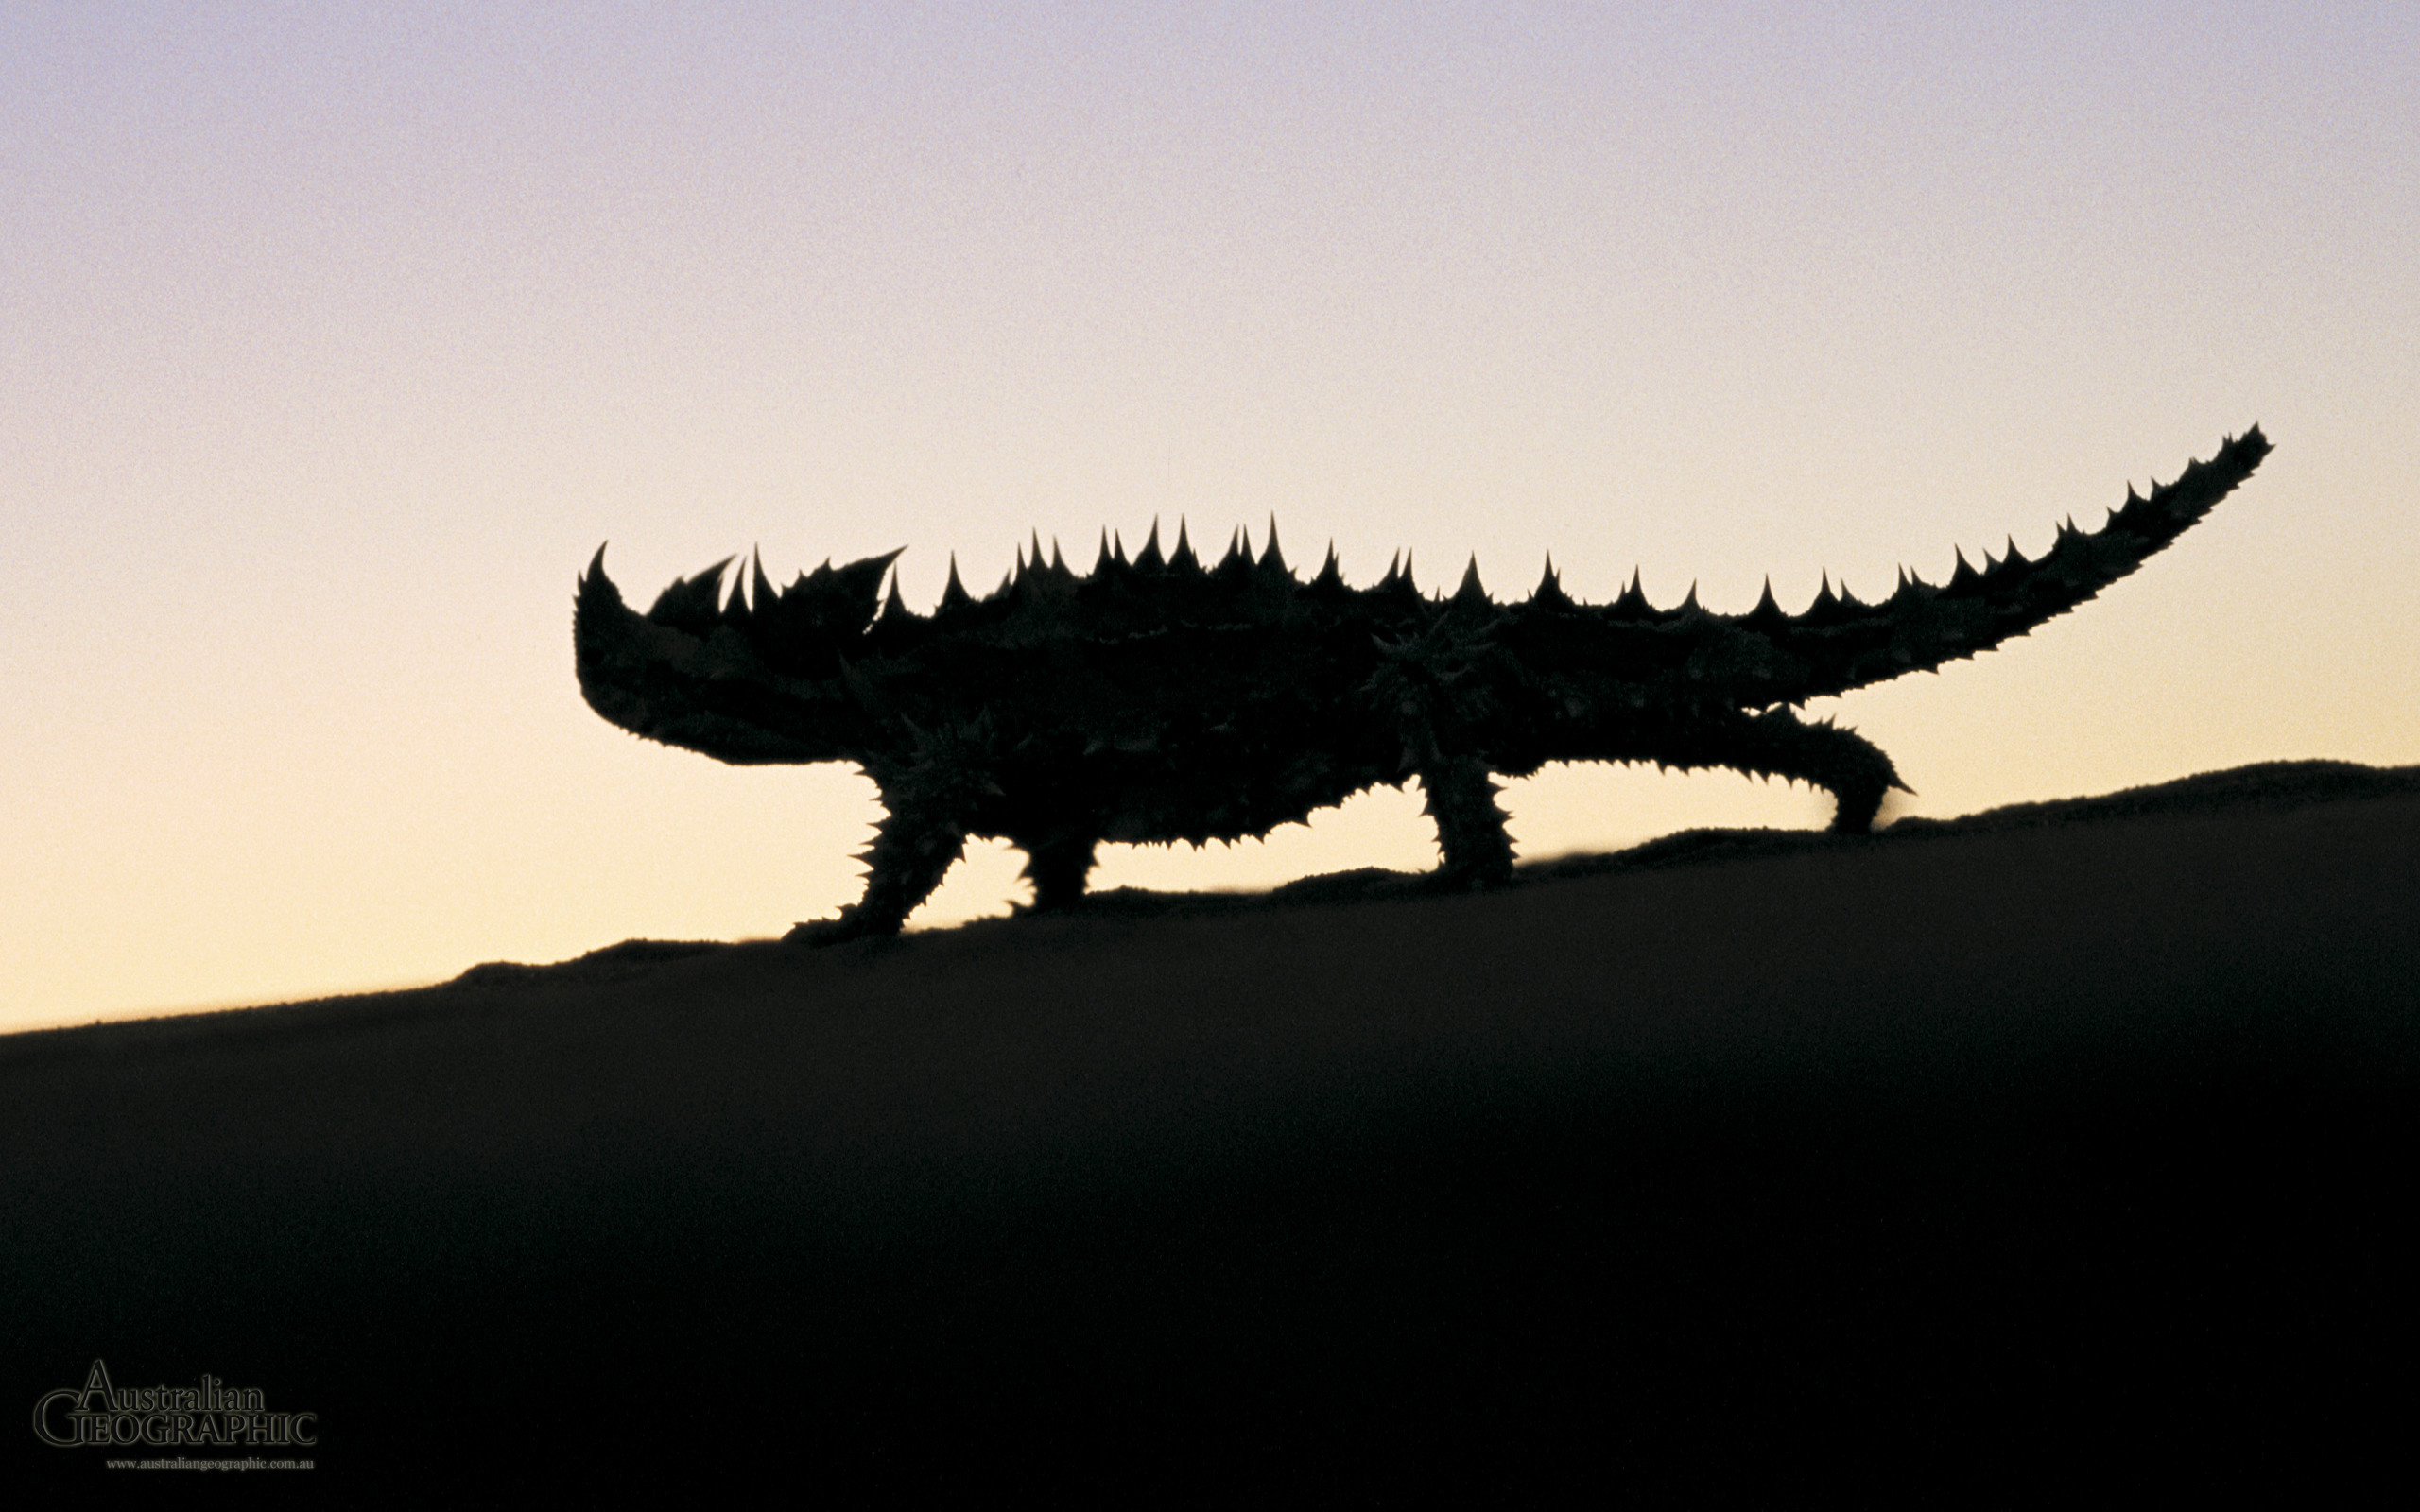 2560x1600 Wallpapers. Images of Australia: Thorny devil